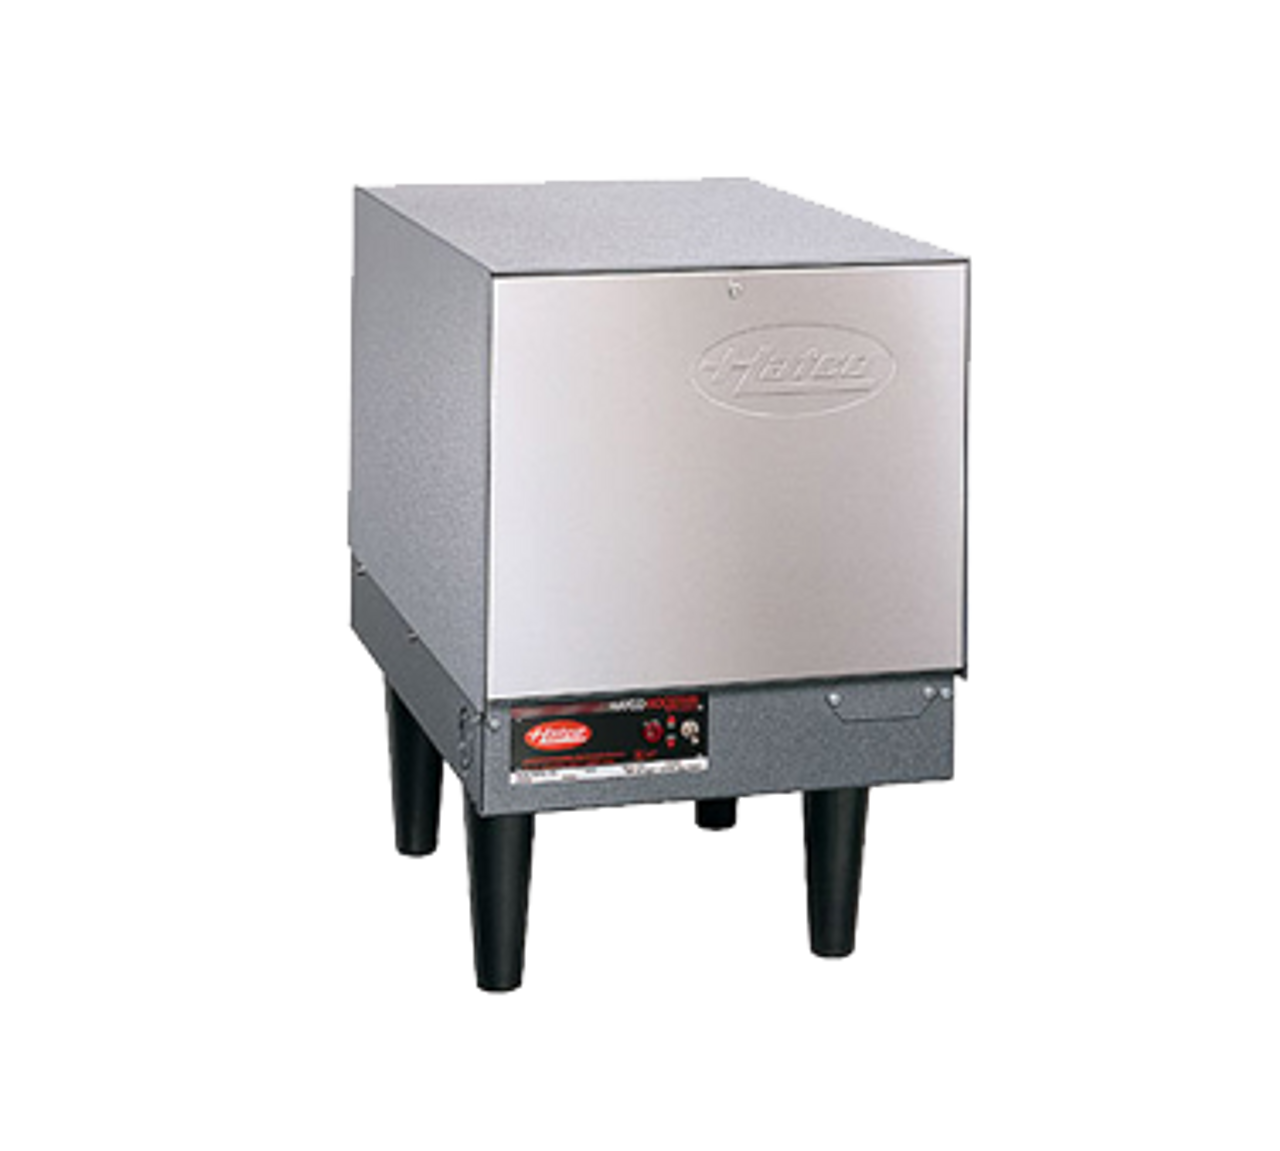 Compact Booster Heater, electric, 6-gallon storage capacity, electric operation, 12-kW, stainless steel front panel, powder-coated silver-gray hammertone body, 6" plastic non-adjustable legs, Castone® lined tank, NSF, cULus, Made in USA. MODEL C-12 PICTURED.